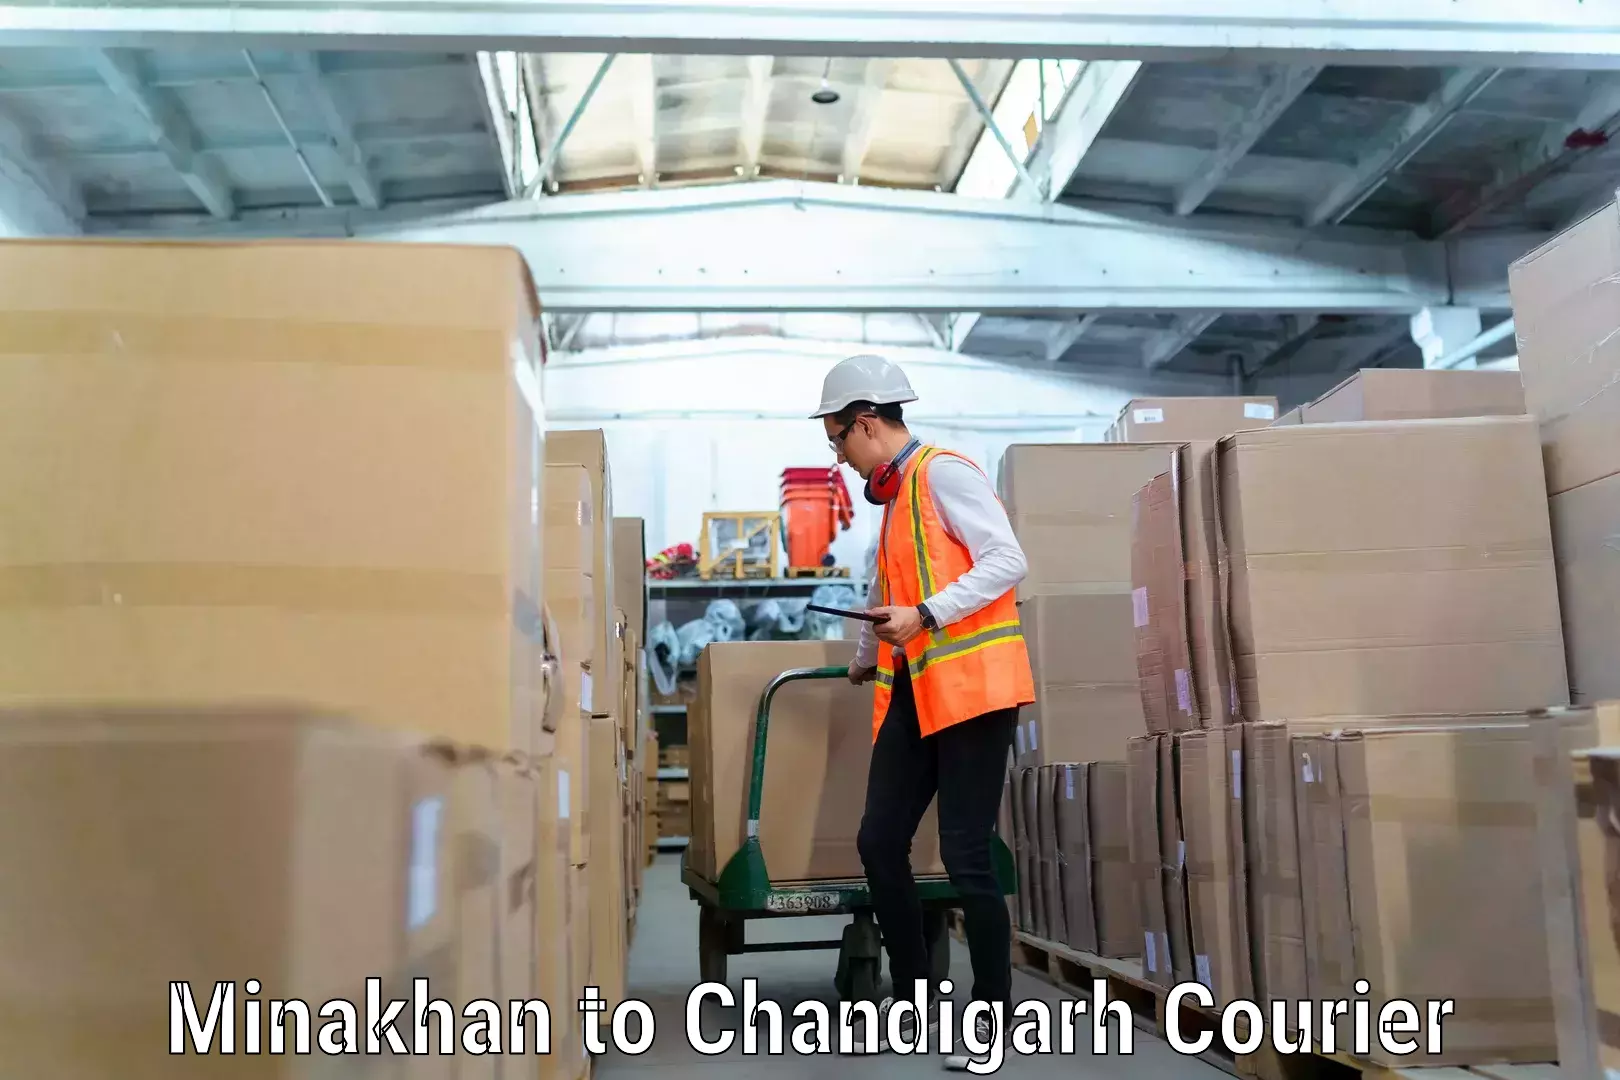 Quality relocation assistance Minakhan to Chandigarh